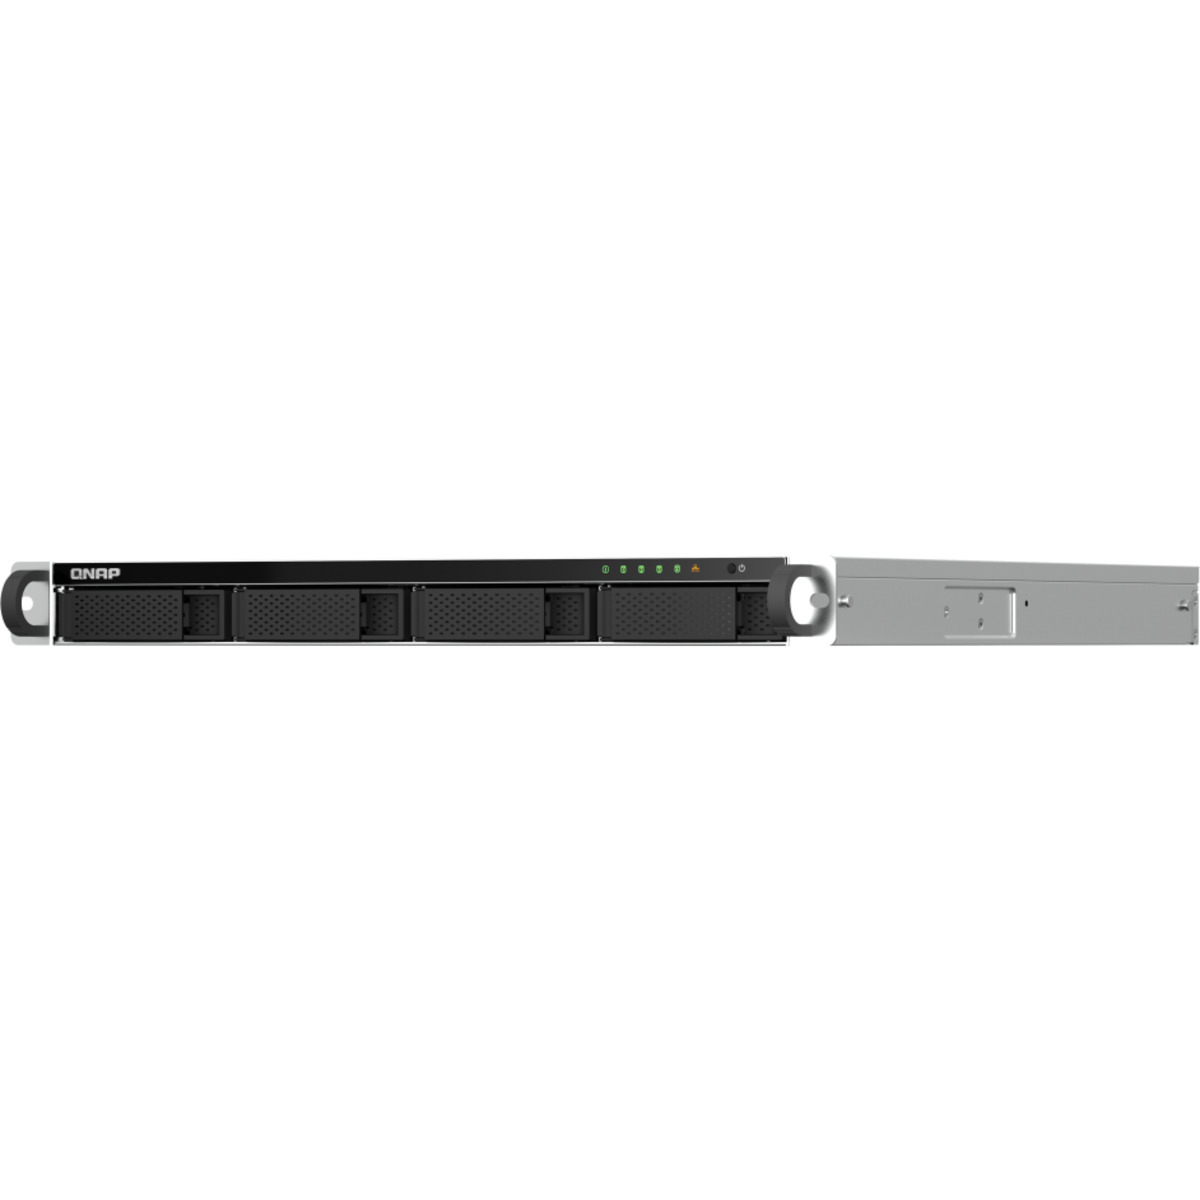 QNAP TS-464U 56tb 4-Bay RackMount Multimedia / Power User / Business NAS - Network Attached Storage Device 4x14tb Seagate IronWolf Pro ST14000NT001 3.5 7200rpm SATA 6Gb/s HDD NAS Class Drives Installed - Burn-In Tested TS-464U